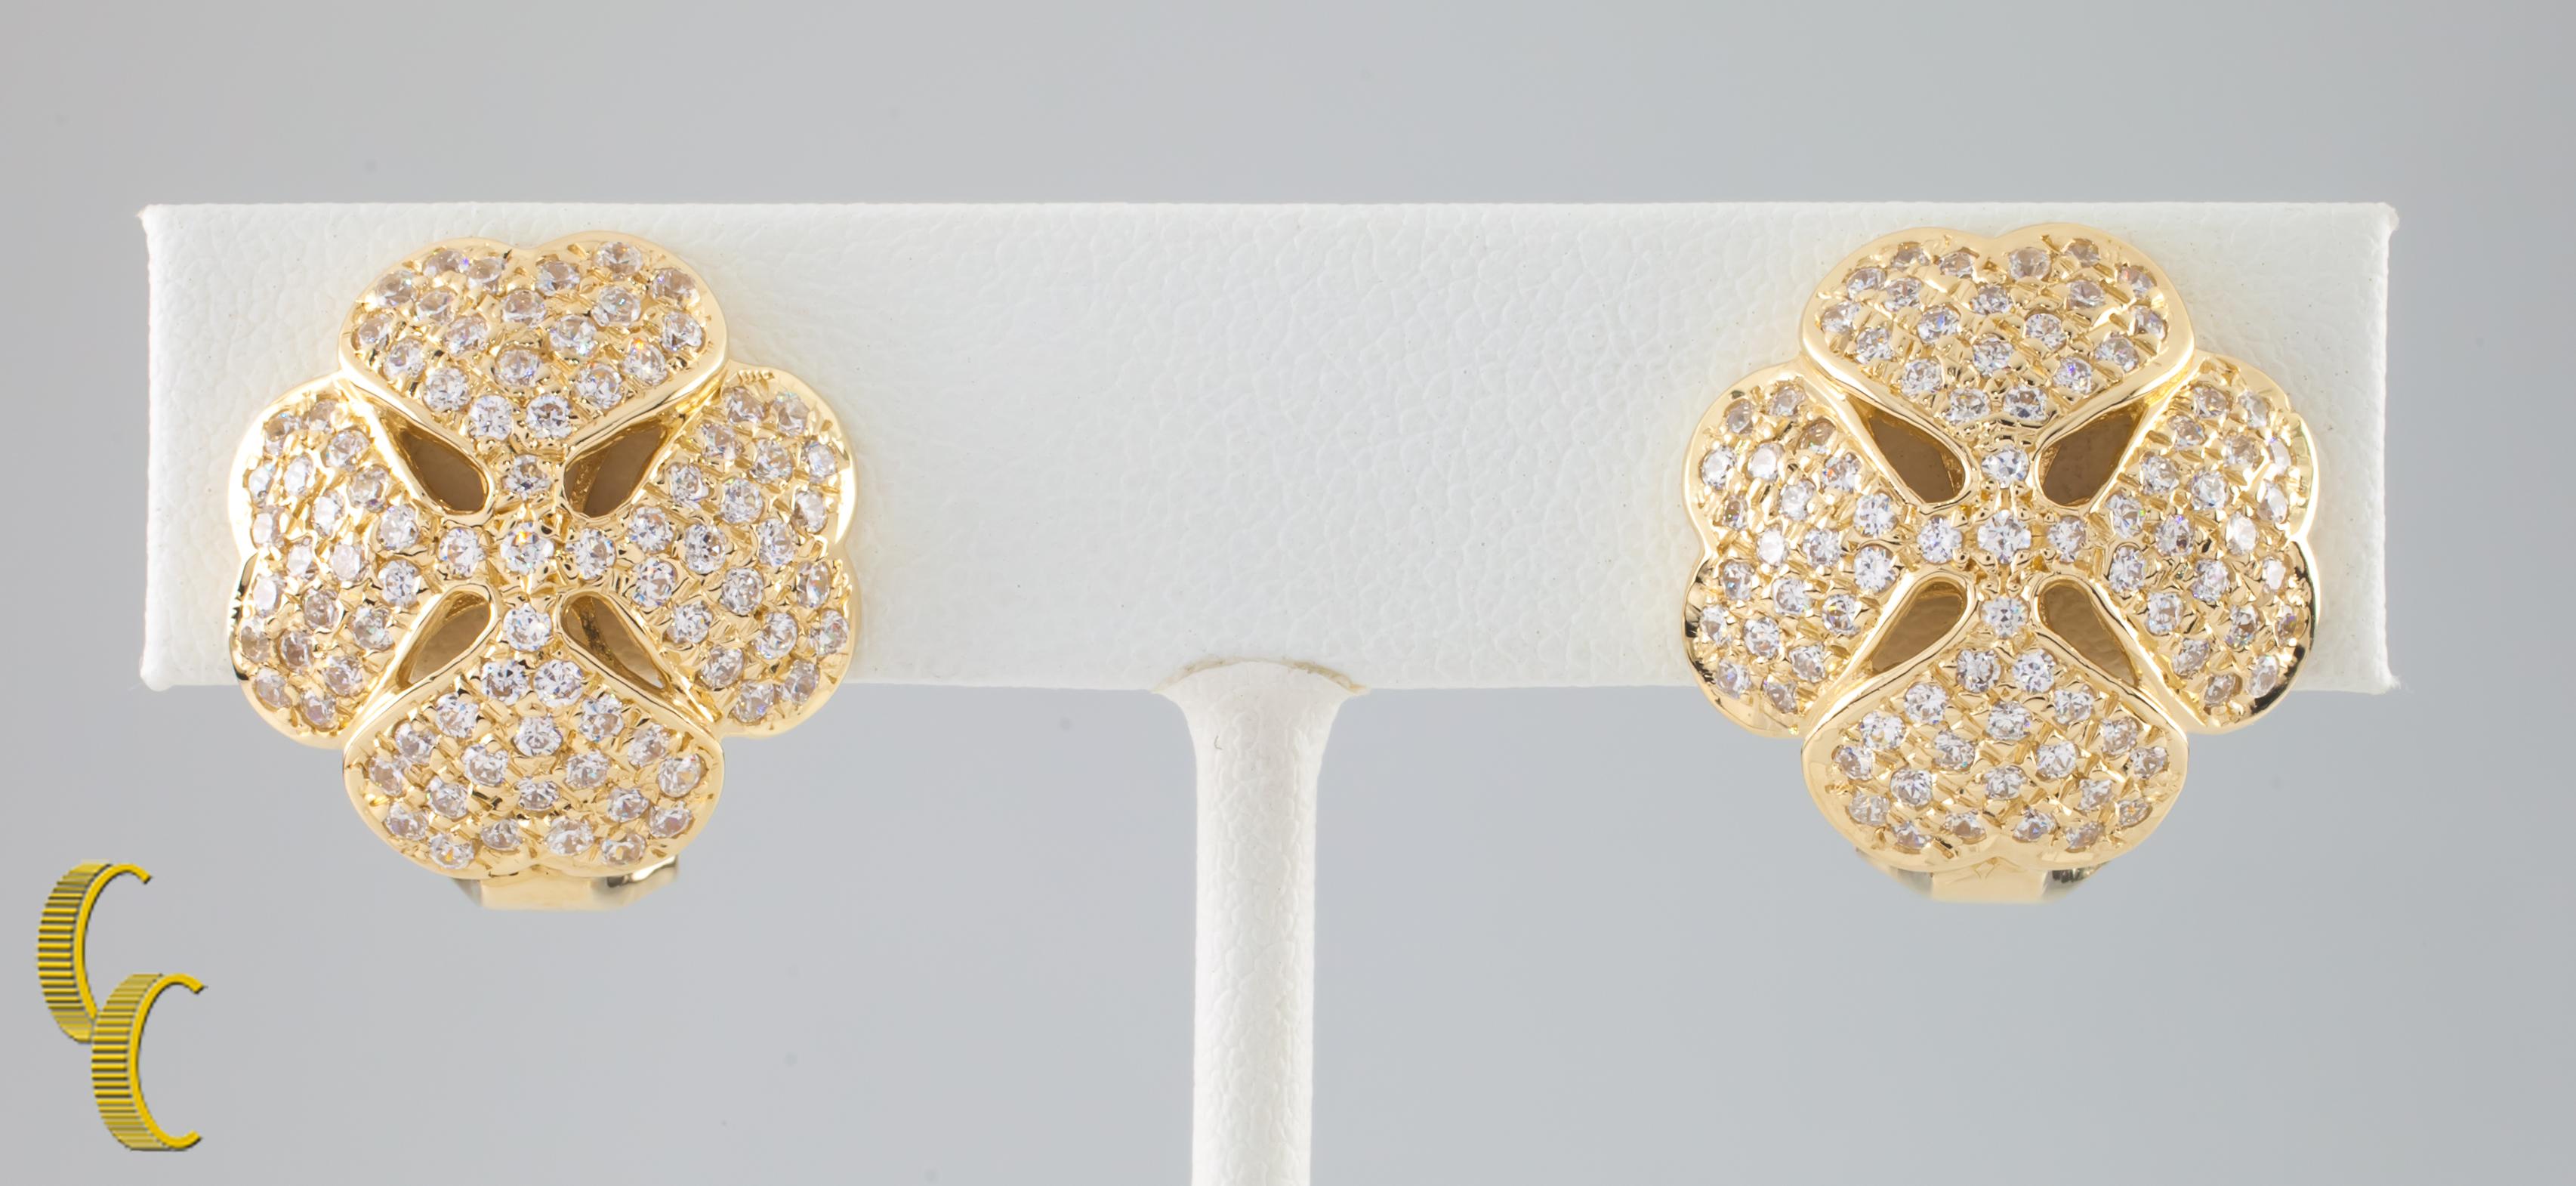 Amazing 14k Yellow Gold Diamond Four Leaf Earrings
Features Pave-Set Round Diamonds in Domed Four-Leaf Clover Setting
Clip-on Backs
Hallmarked 